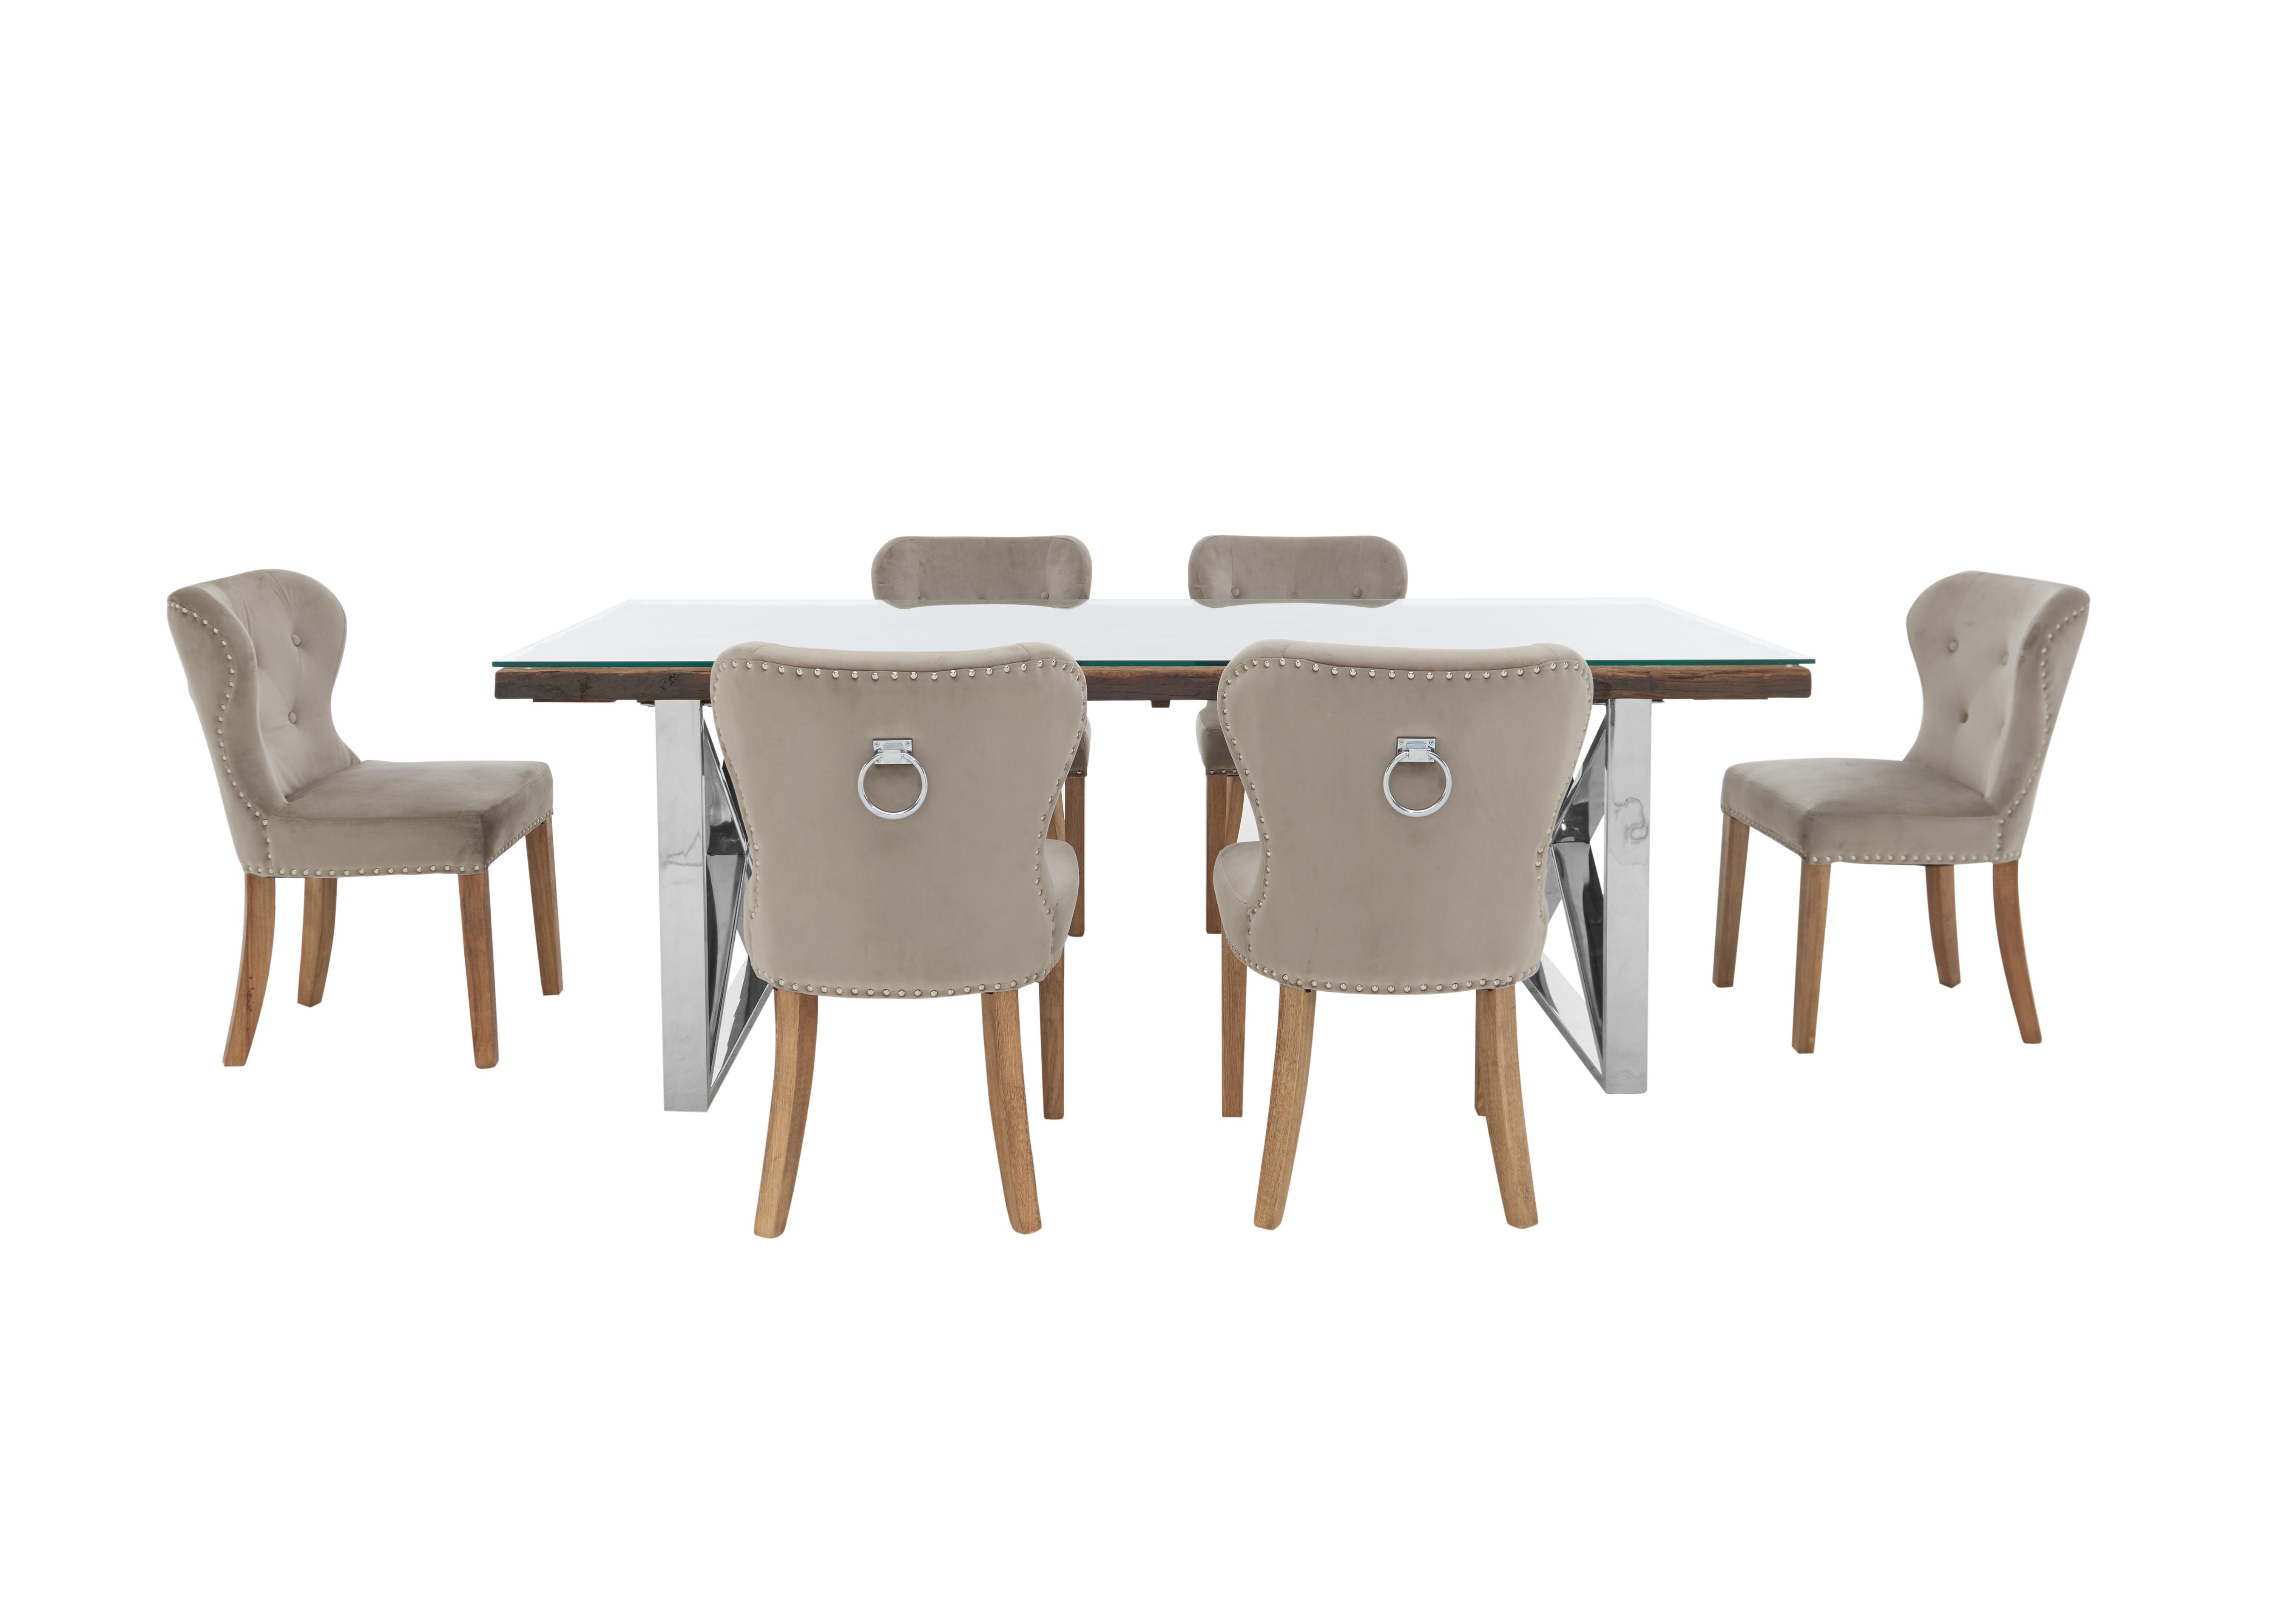 Chennai Dining Table with X-Leg Base and 6 Upholstered Dining Chairs in Taupe Chairs on Furniture Village